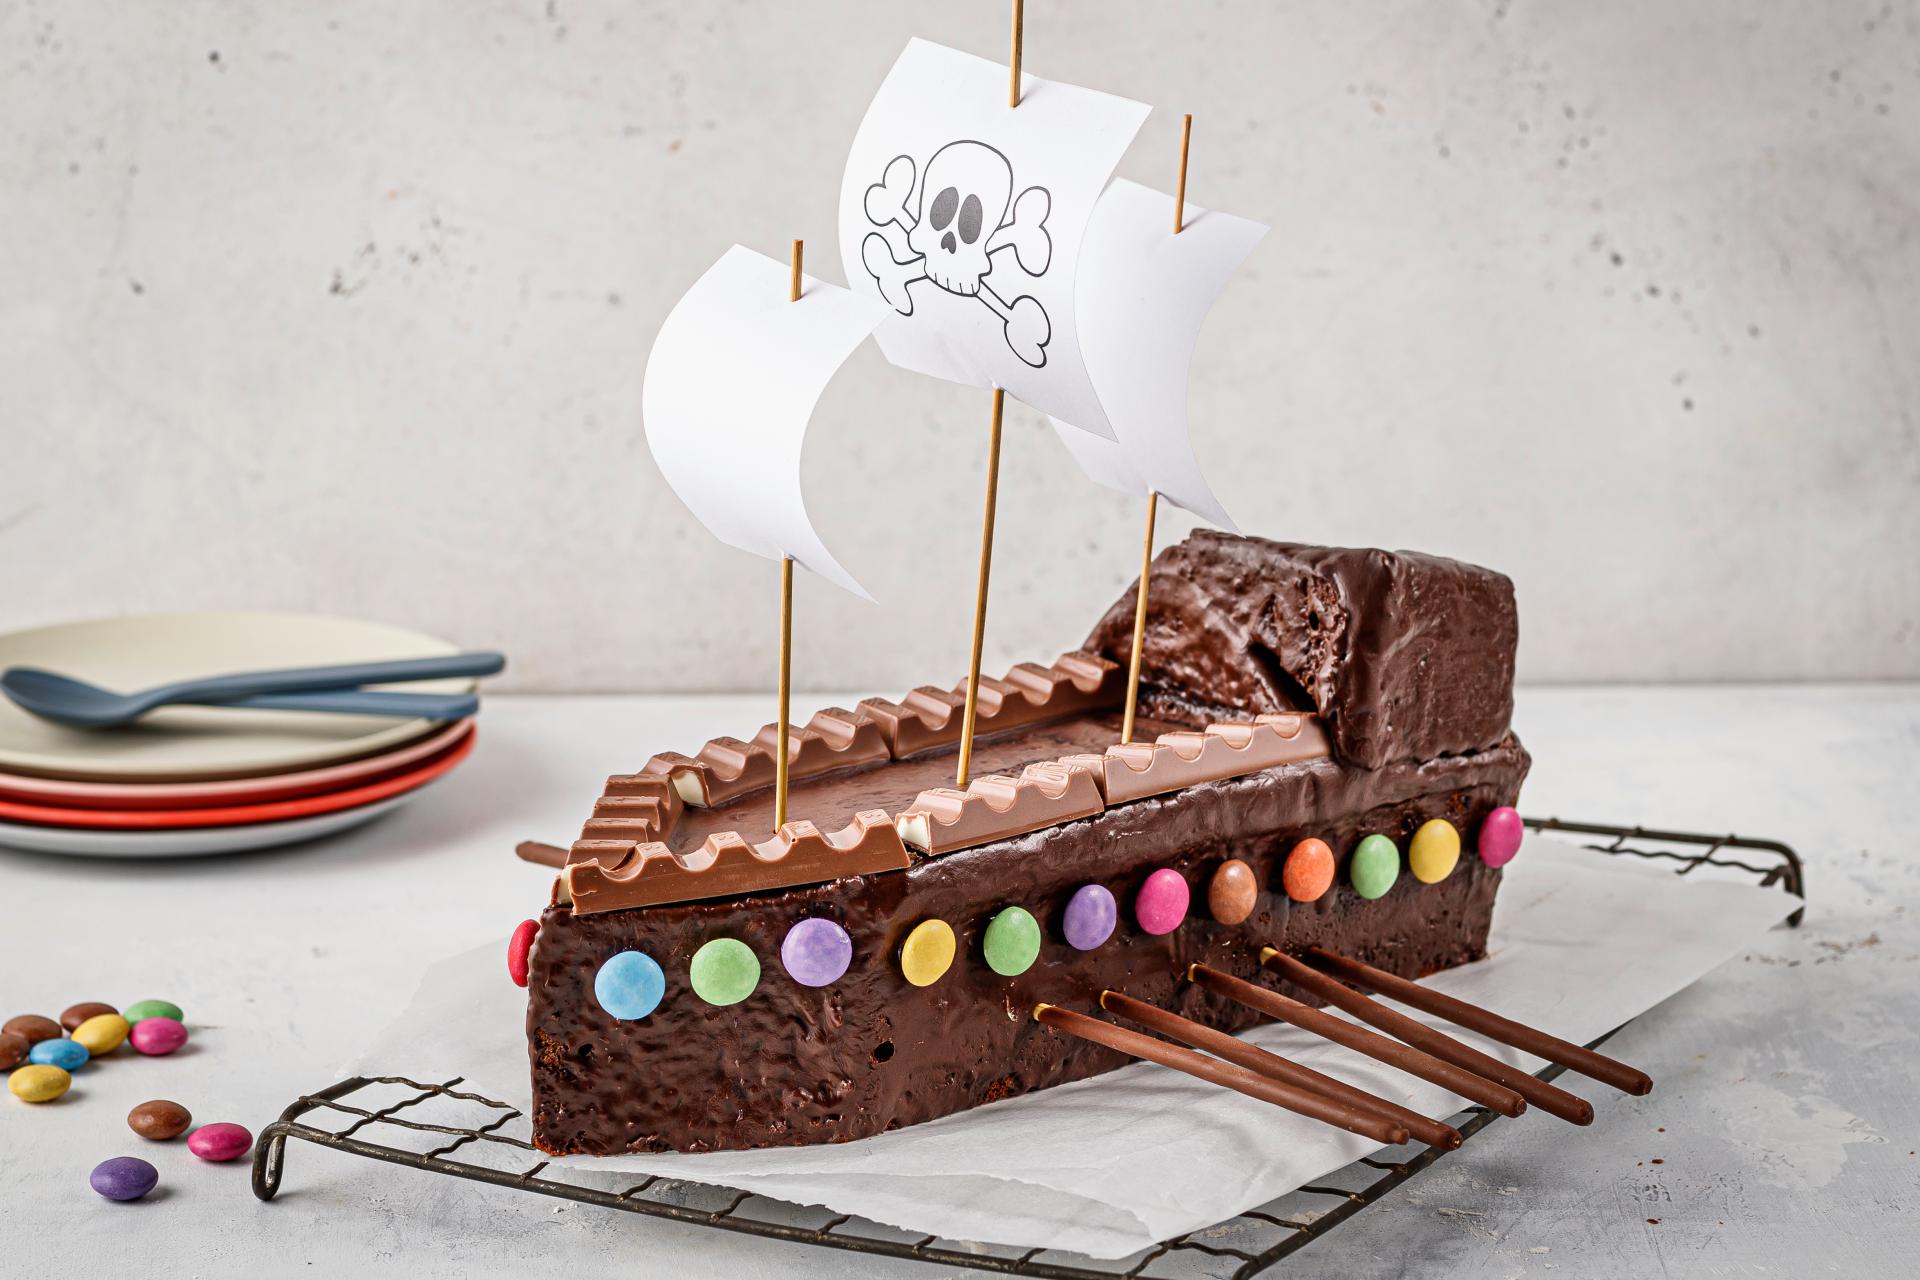 Ocean Vengeance | Pirate cake, Pirate ship cakes, Party cakes